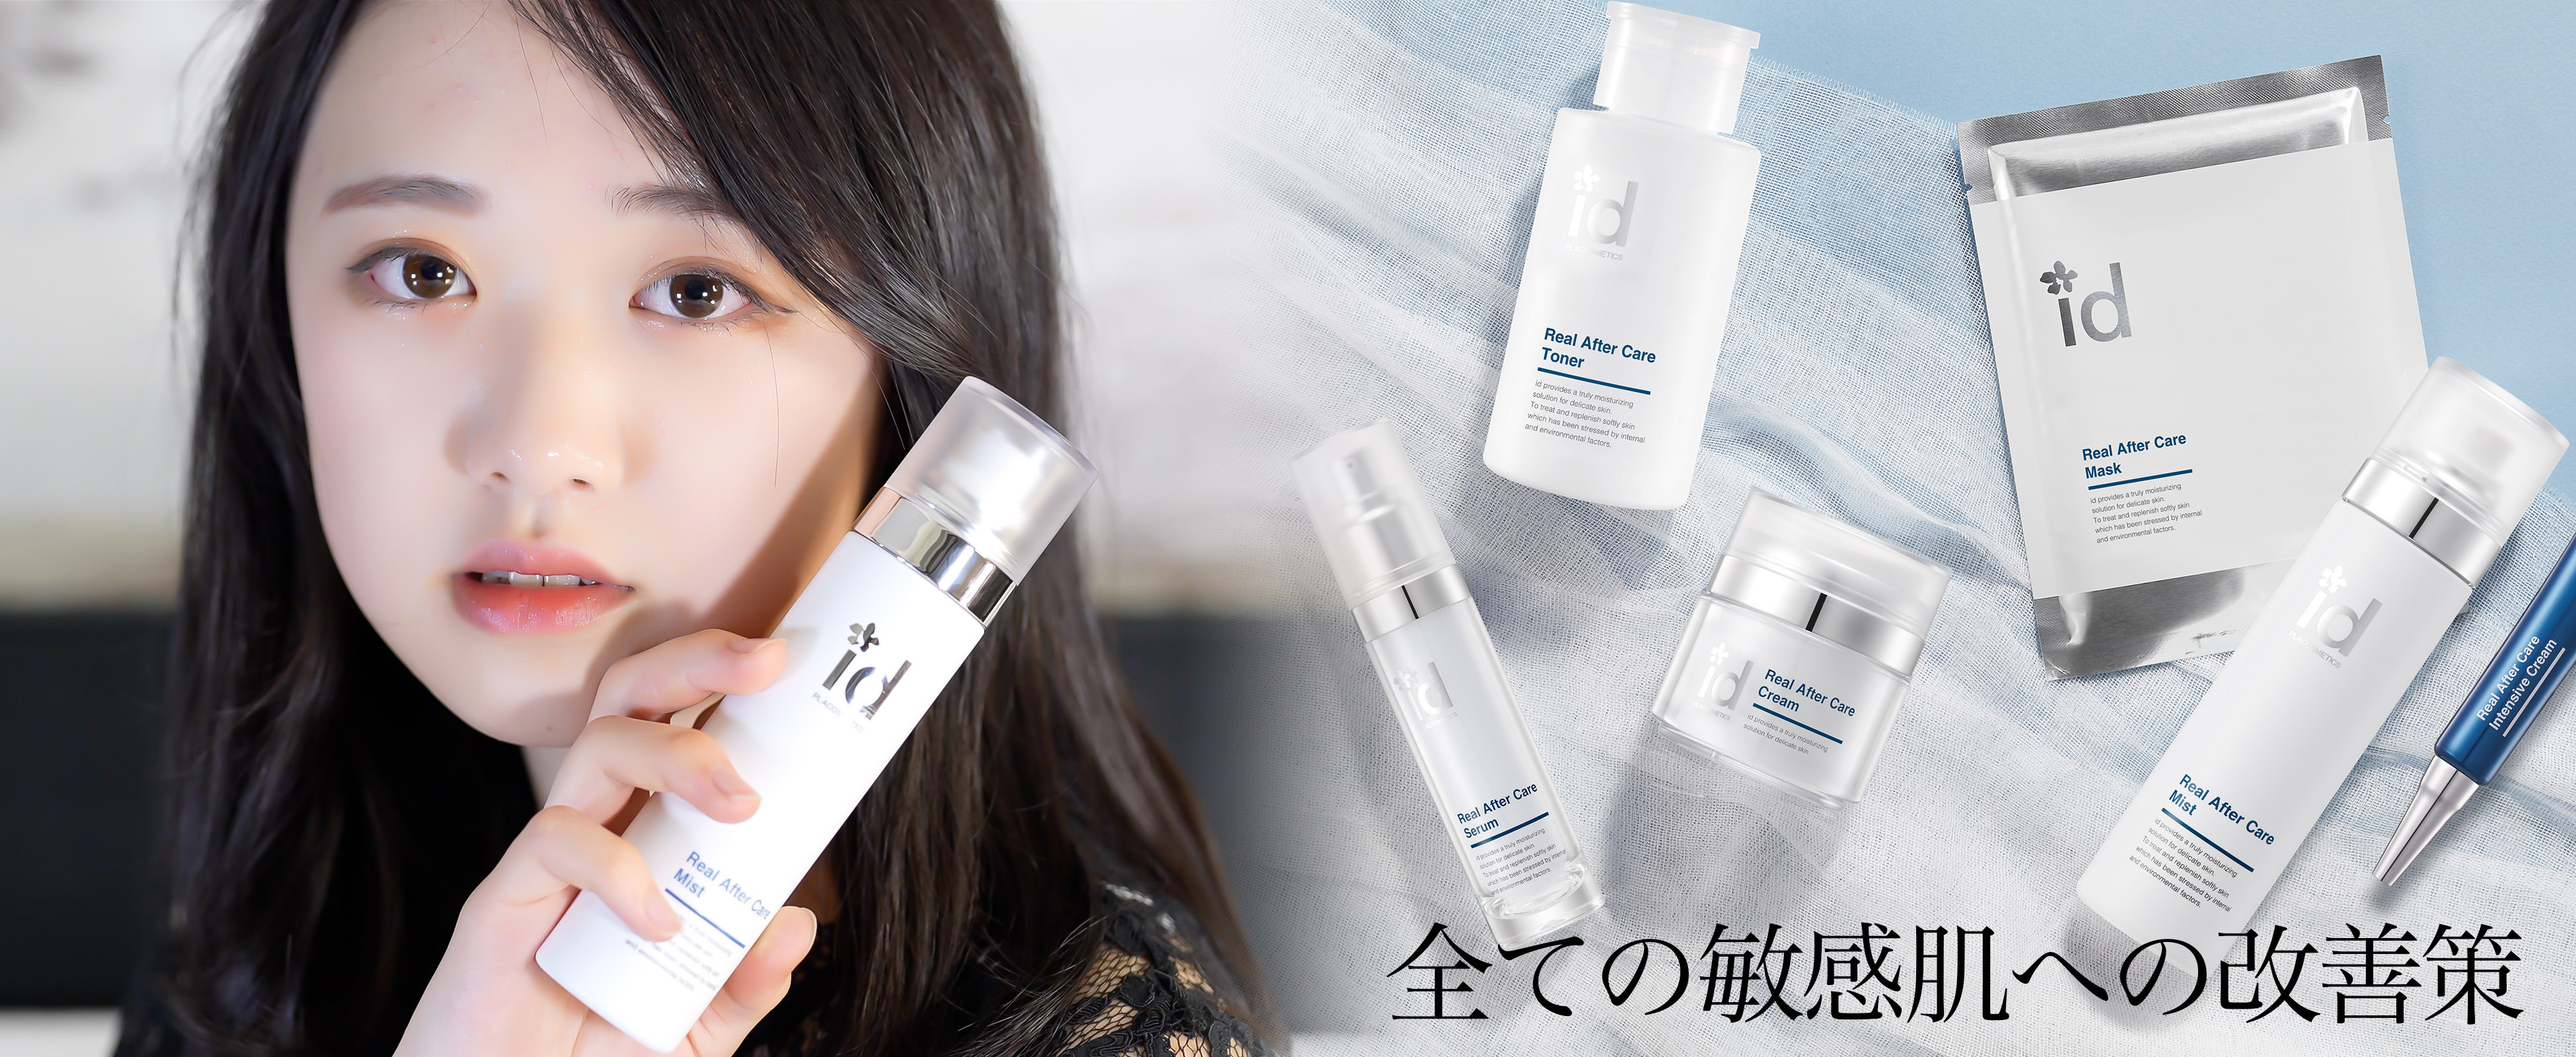 id FACE FIT シグニチャークリーム (50ml) | JIN [仁] x id PLACOSMETICS